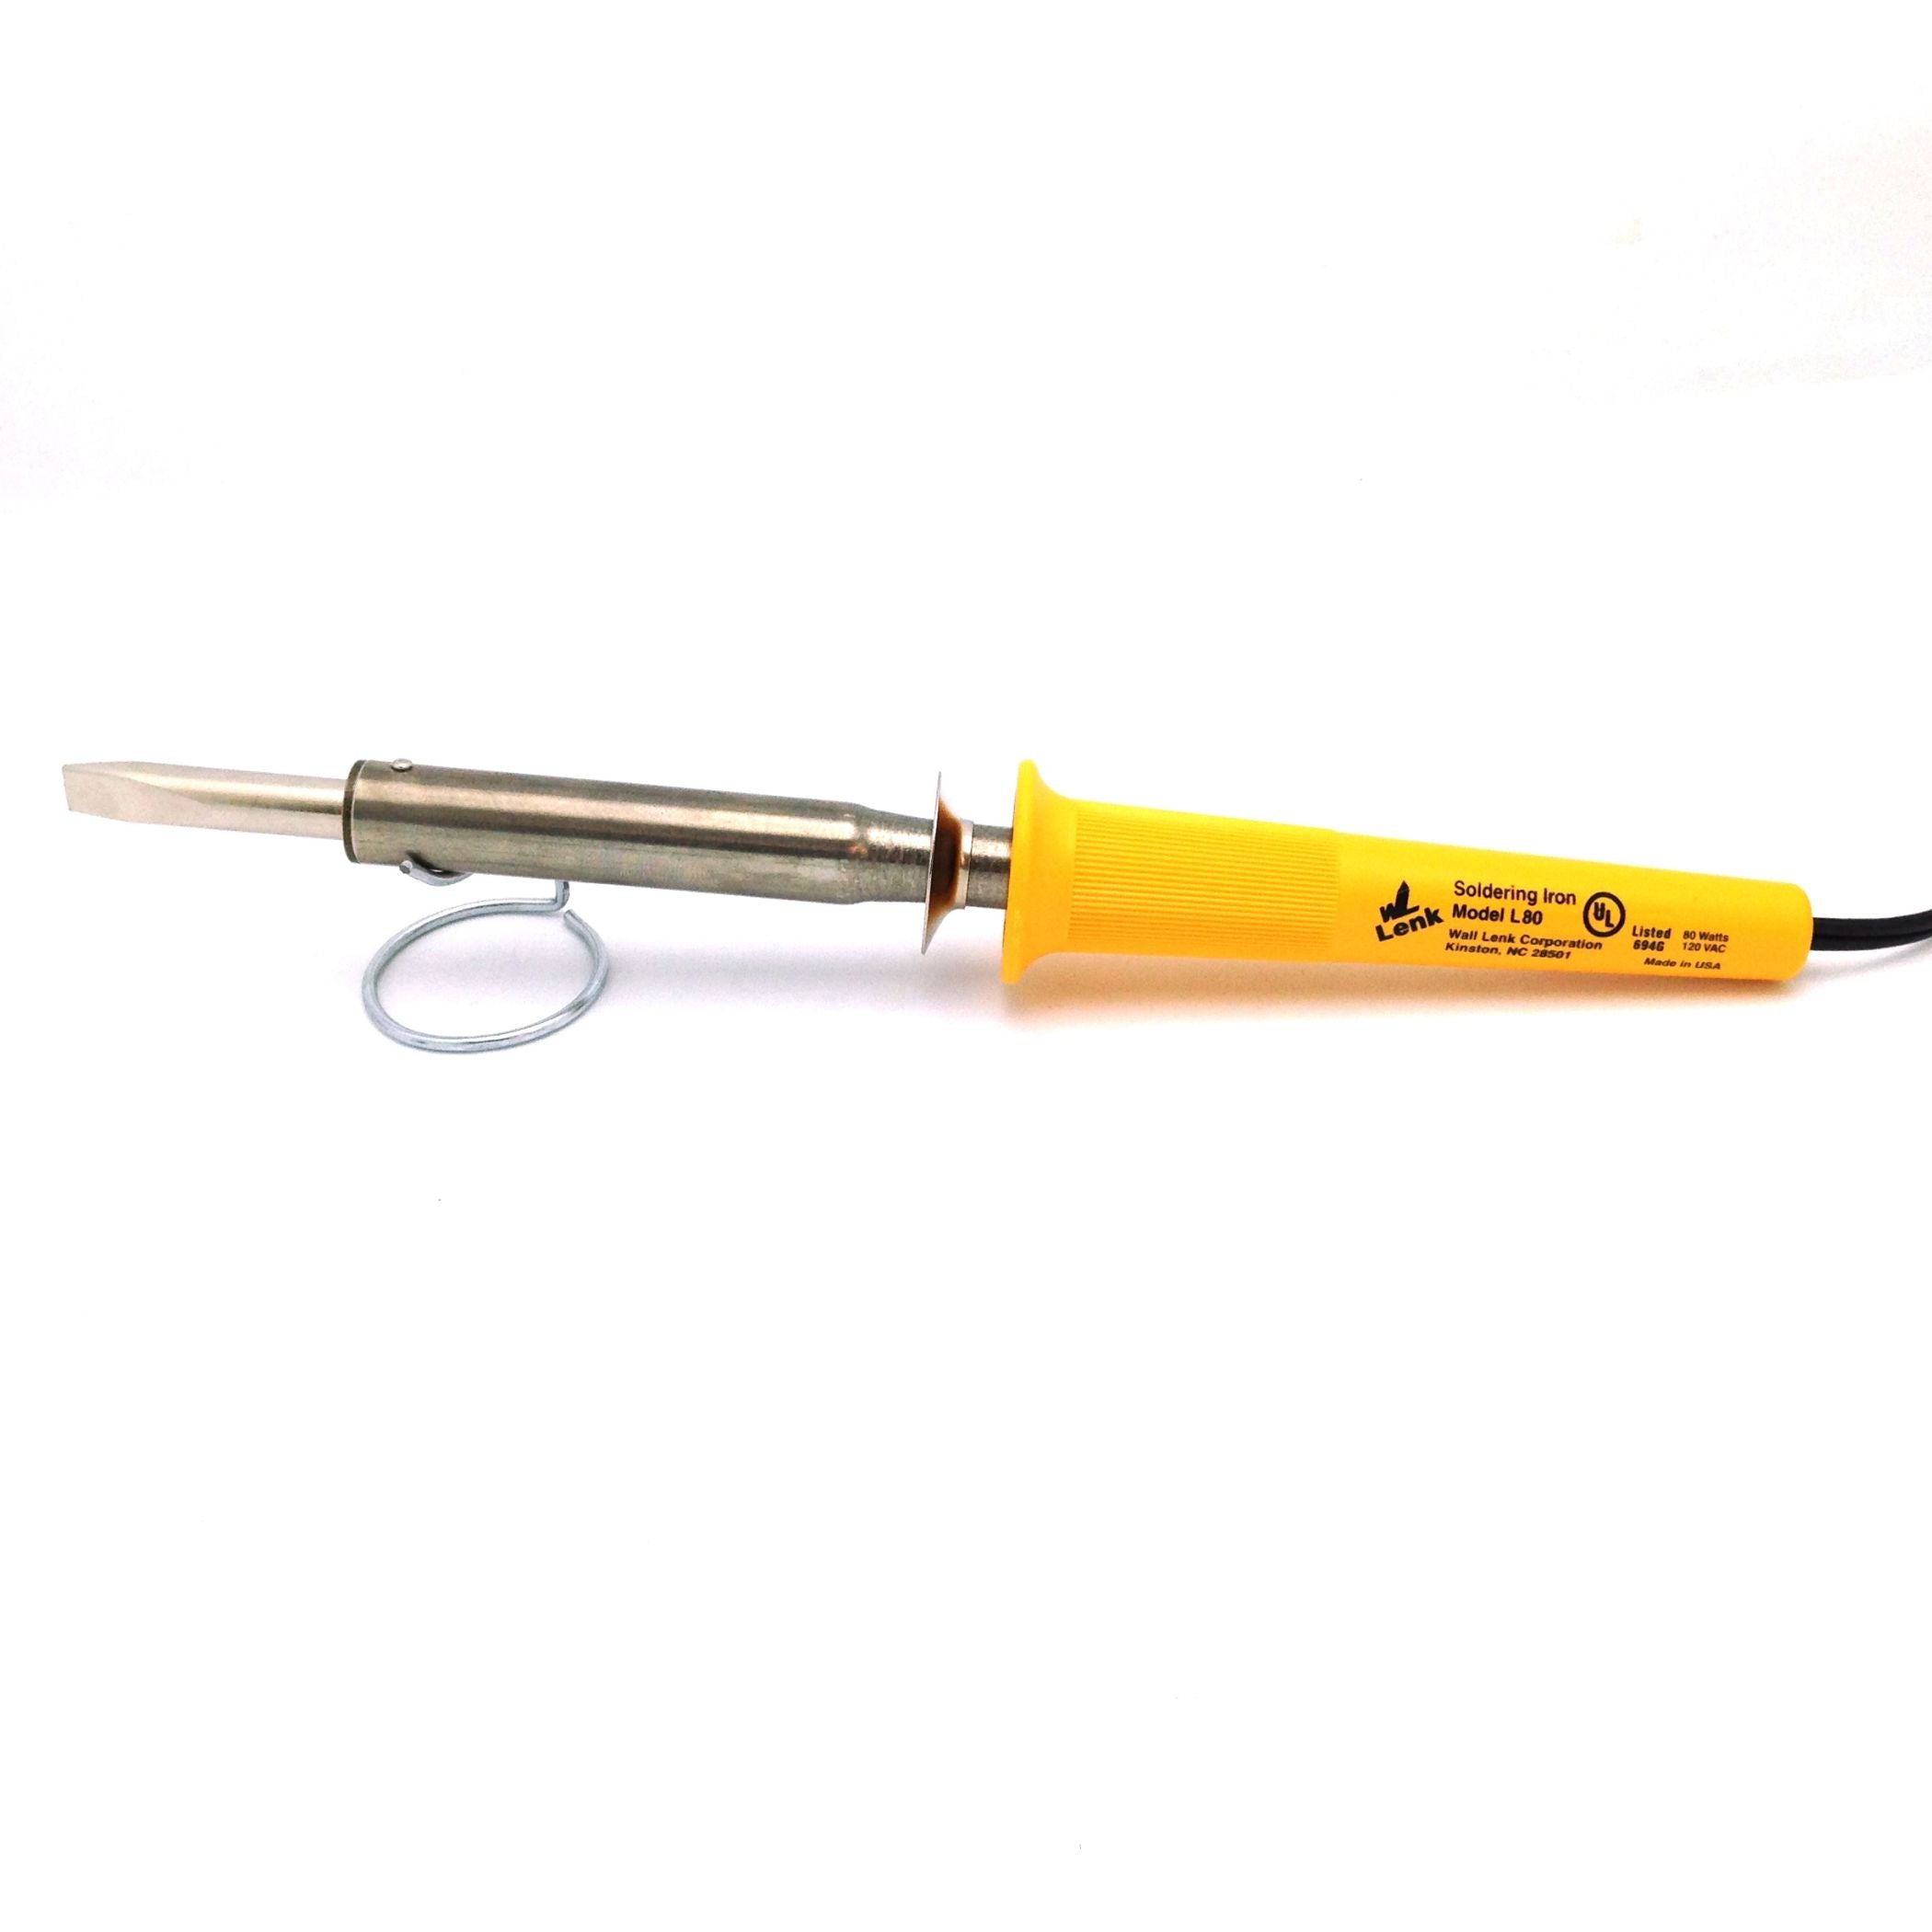 Quick FX3 Rechargeable Hot Knife Tool - Wall Lenk Corporation